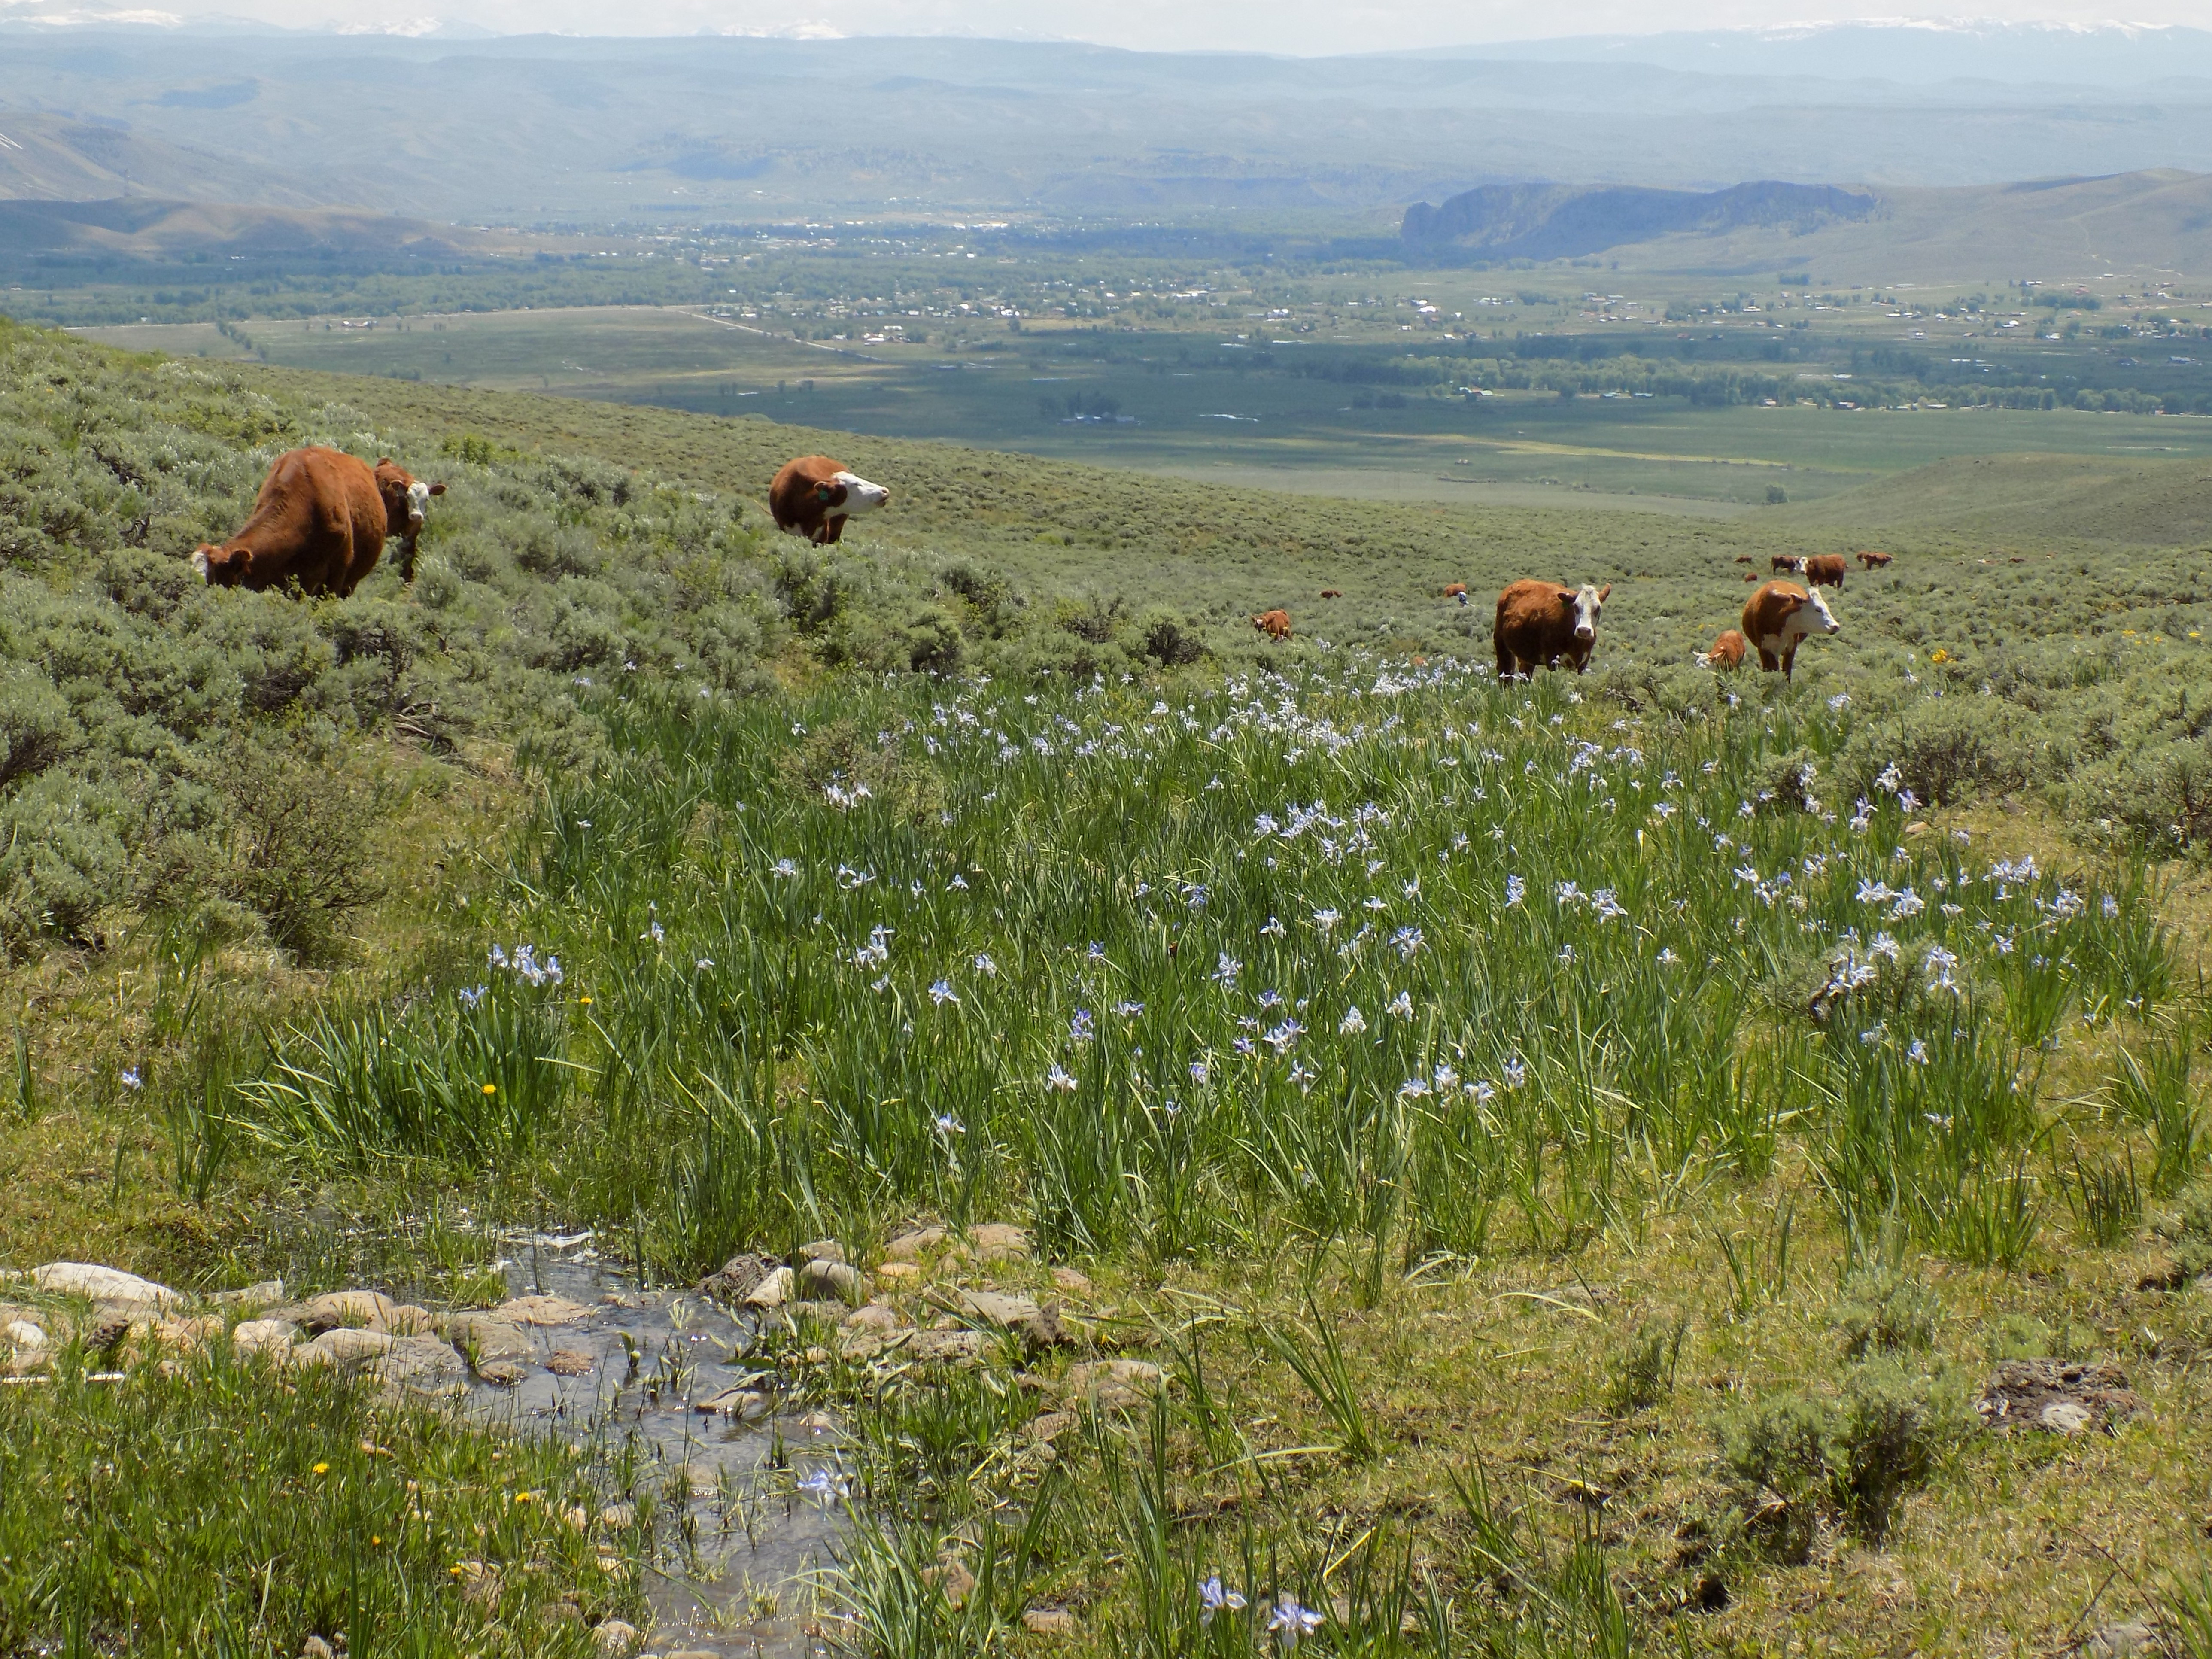 Gunnison sage-grouse are found only in southwestern Colorado and southeastern Utah. The birds' life cycles and habitat needs are highly compatible with grazing. This photo shows the town of Gunnison behind cattle in a wet meadow in sagebrush country. Photo: Shawn Conner